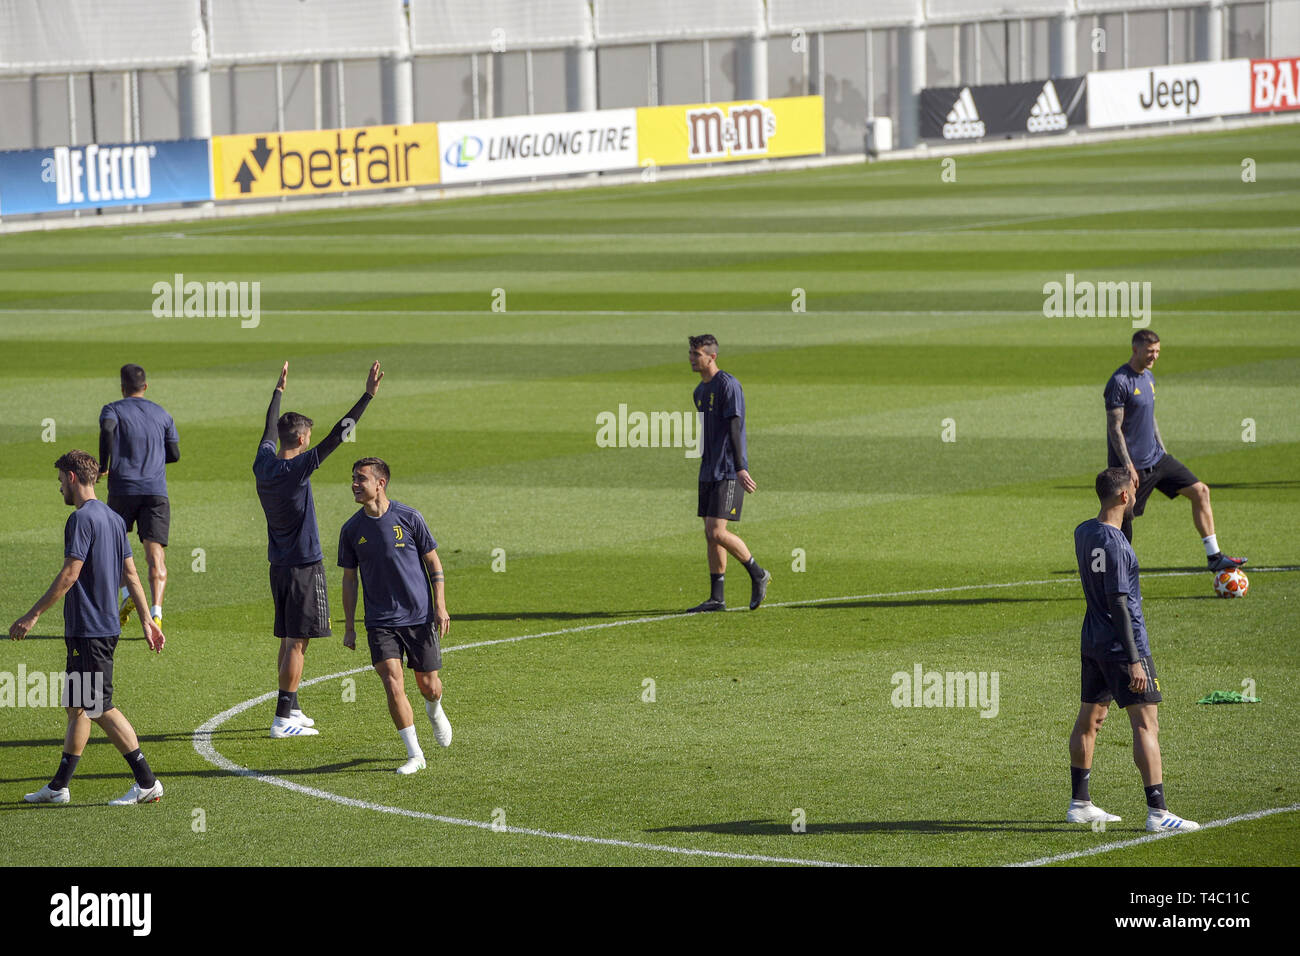 Turin, Italy. 15th Apr, 2019. Soccer: Champions League, before the quarter-finals, Juventus Turin - Ajax Amsterdam, Training: Juventus players during training. Credit: Antonio Polia/dpa/Alamy Live News Stock Photo